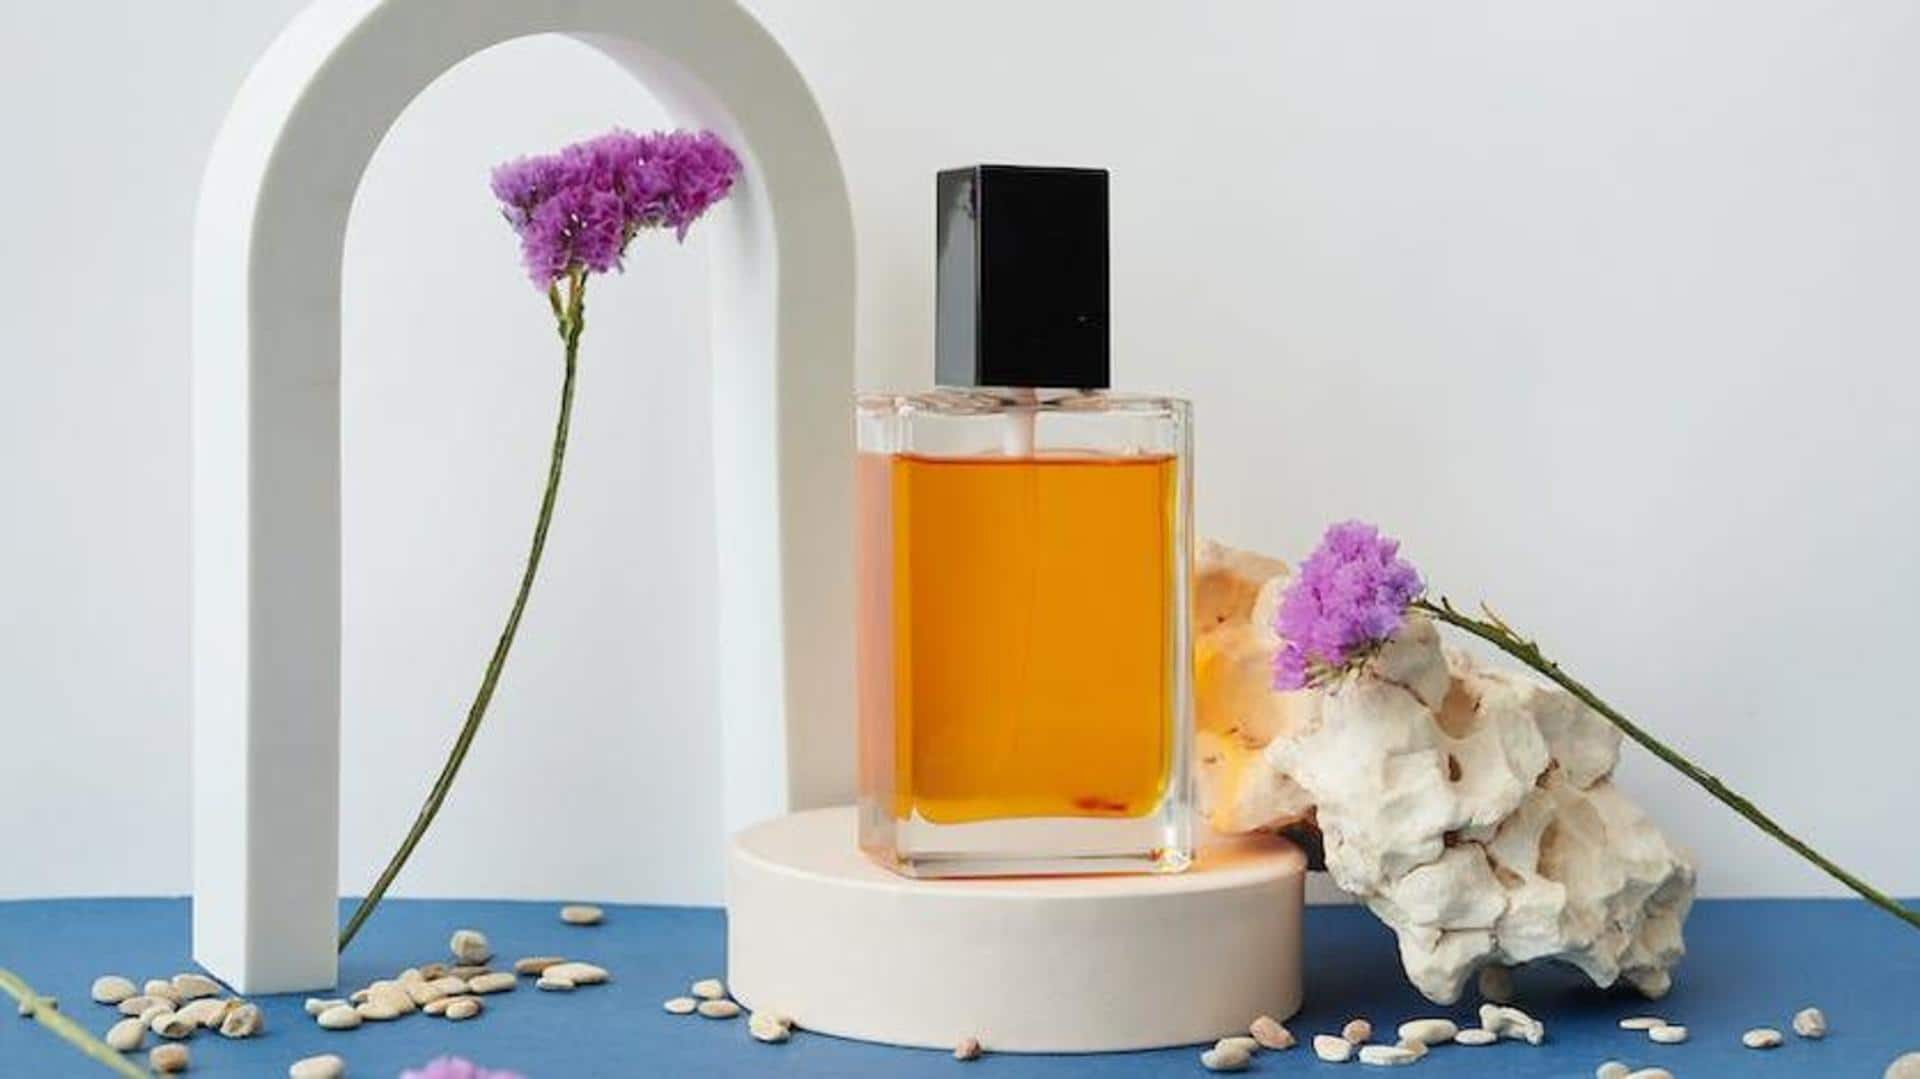 Golden rules of applying perfume the right way